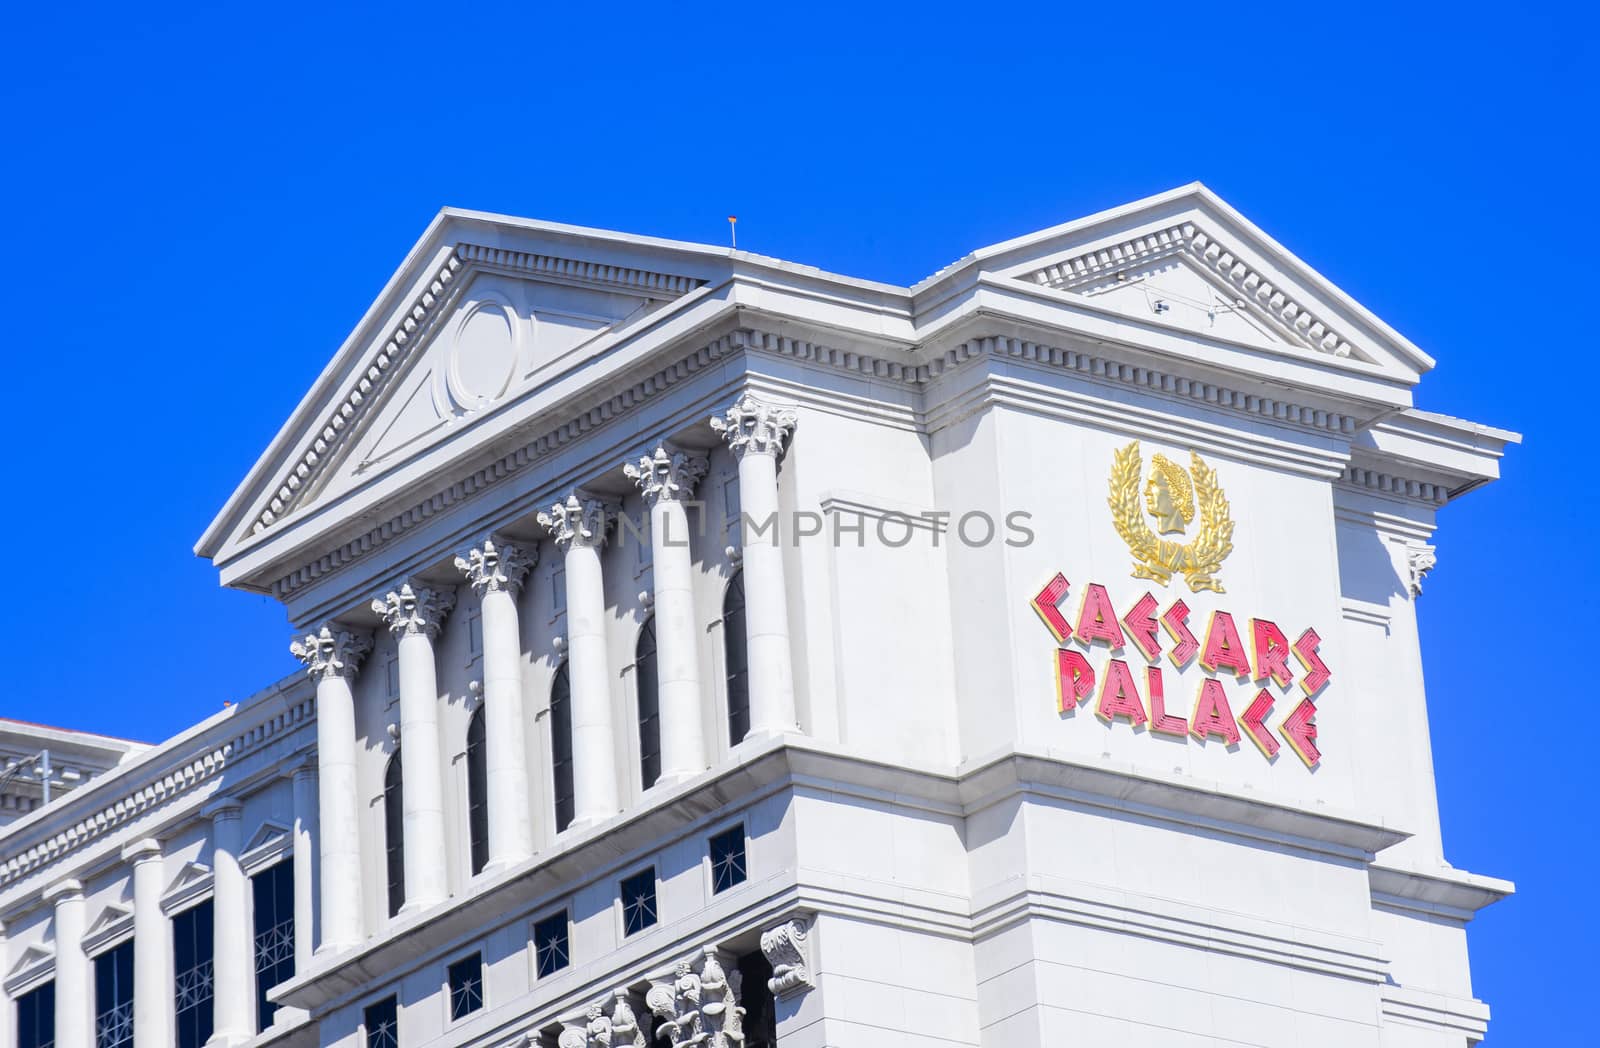 LAS VEGAS - MARCH 25 :The Caesars Palace hotel on March 25, 2014 in Las Vegas. Caesars Palace is a luxury hotel and casino located on the Las Vegas Strip. Caesars has 3,348 rooms in five towers 